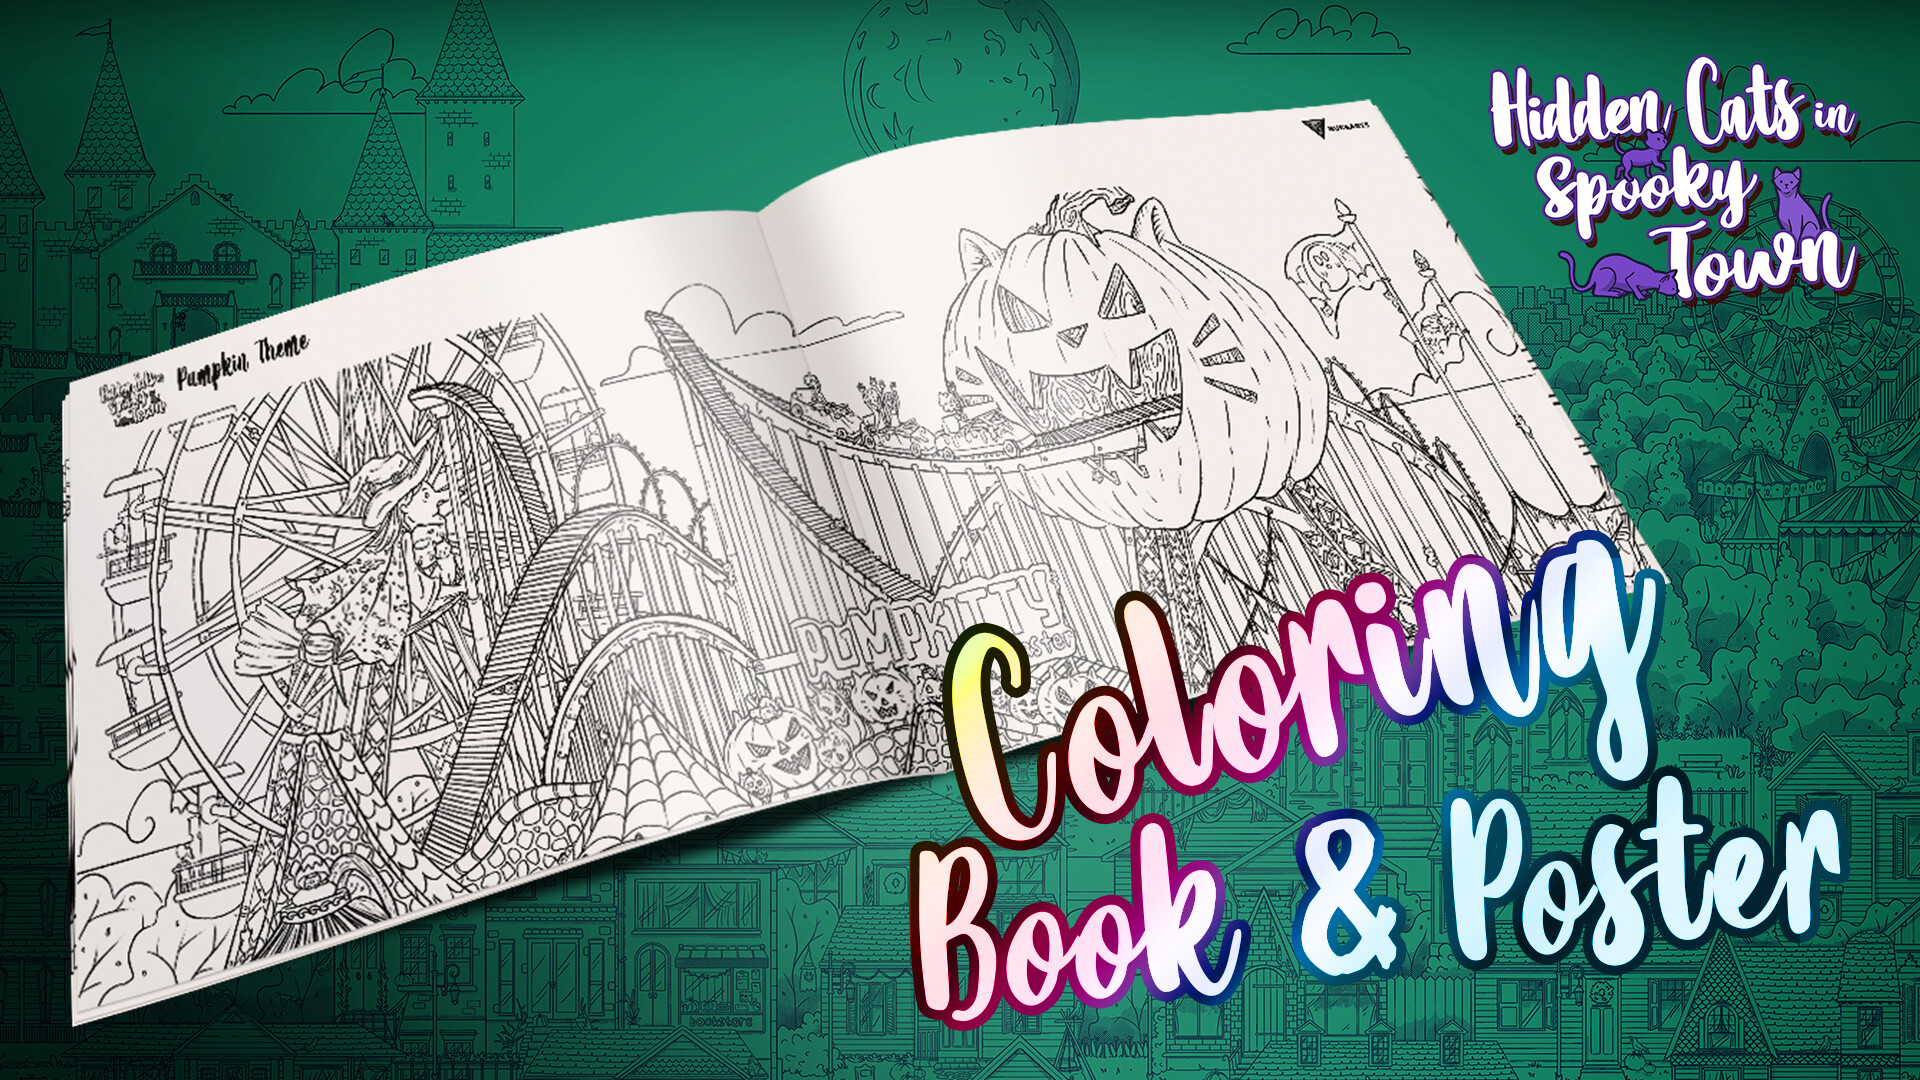 Hidden Cats in Spooky Town - Printable PDF Coloring Book and Poster Featured Screenshot #1